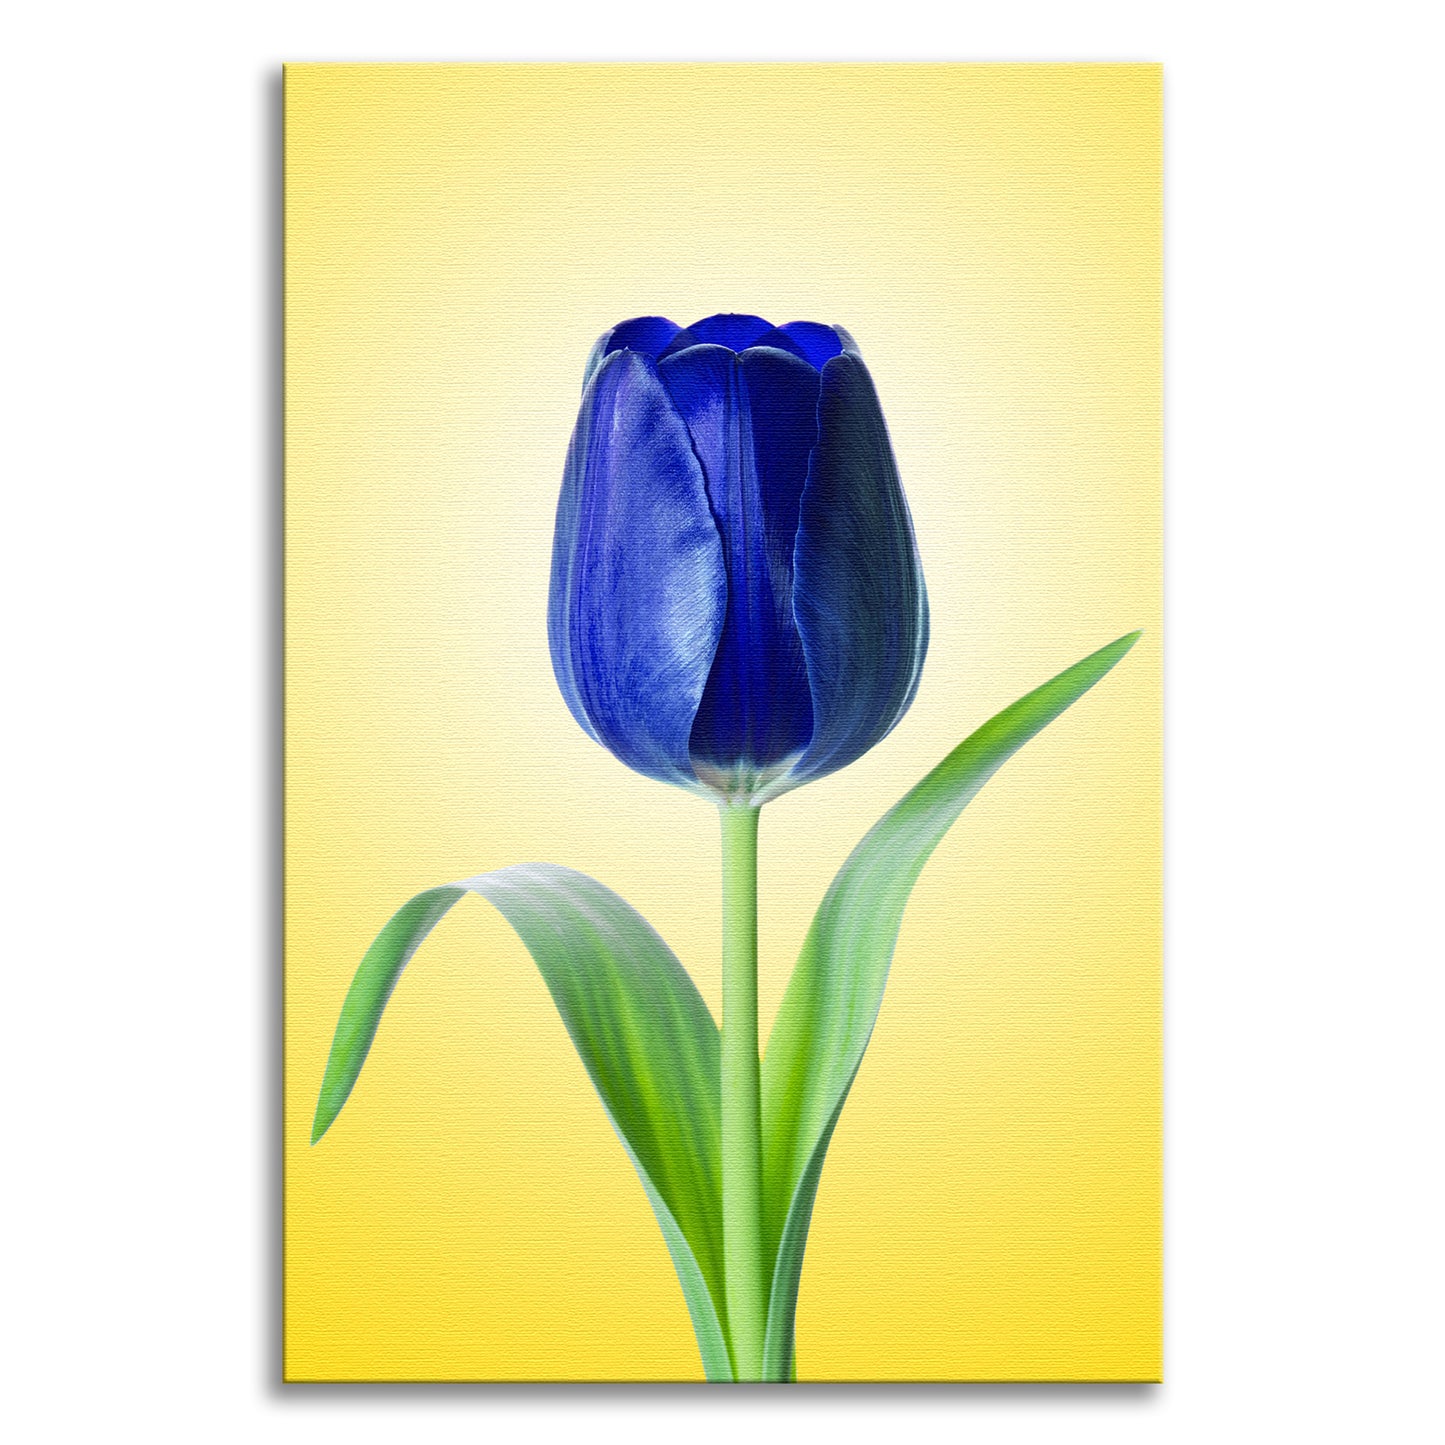 Blue Tulip Minimal Floral Nature Photo - For Ukraine Refugees Canvas Wall Art Print